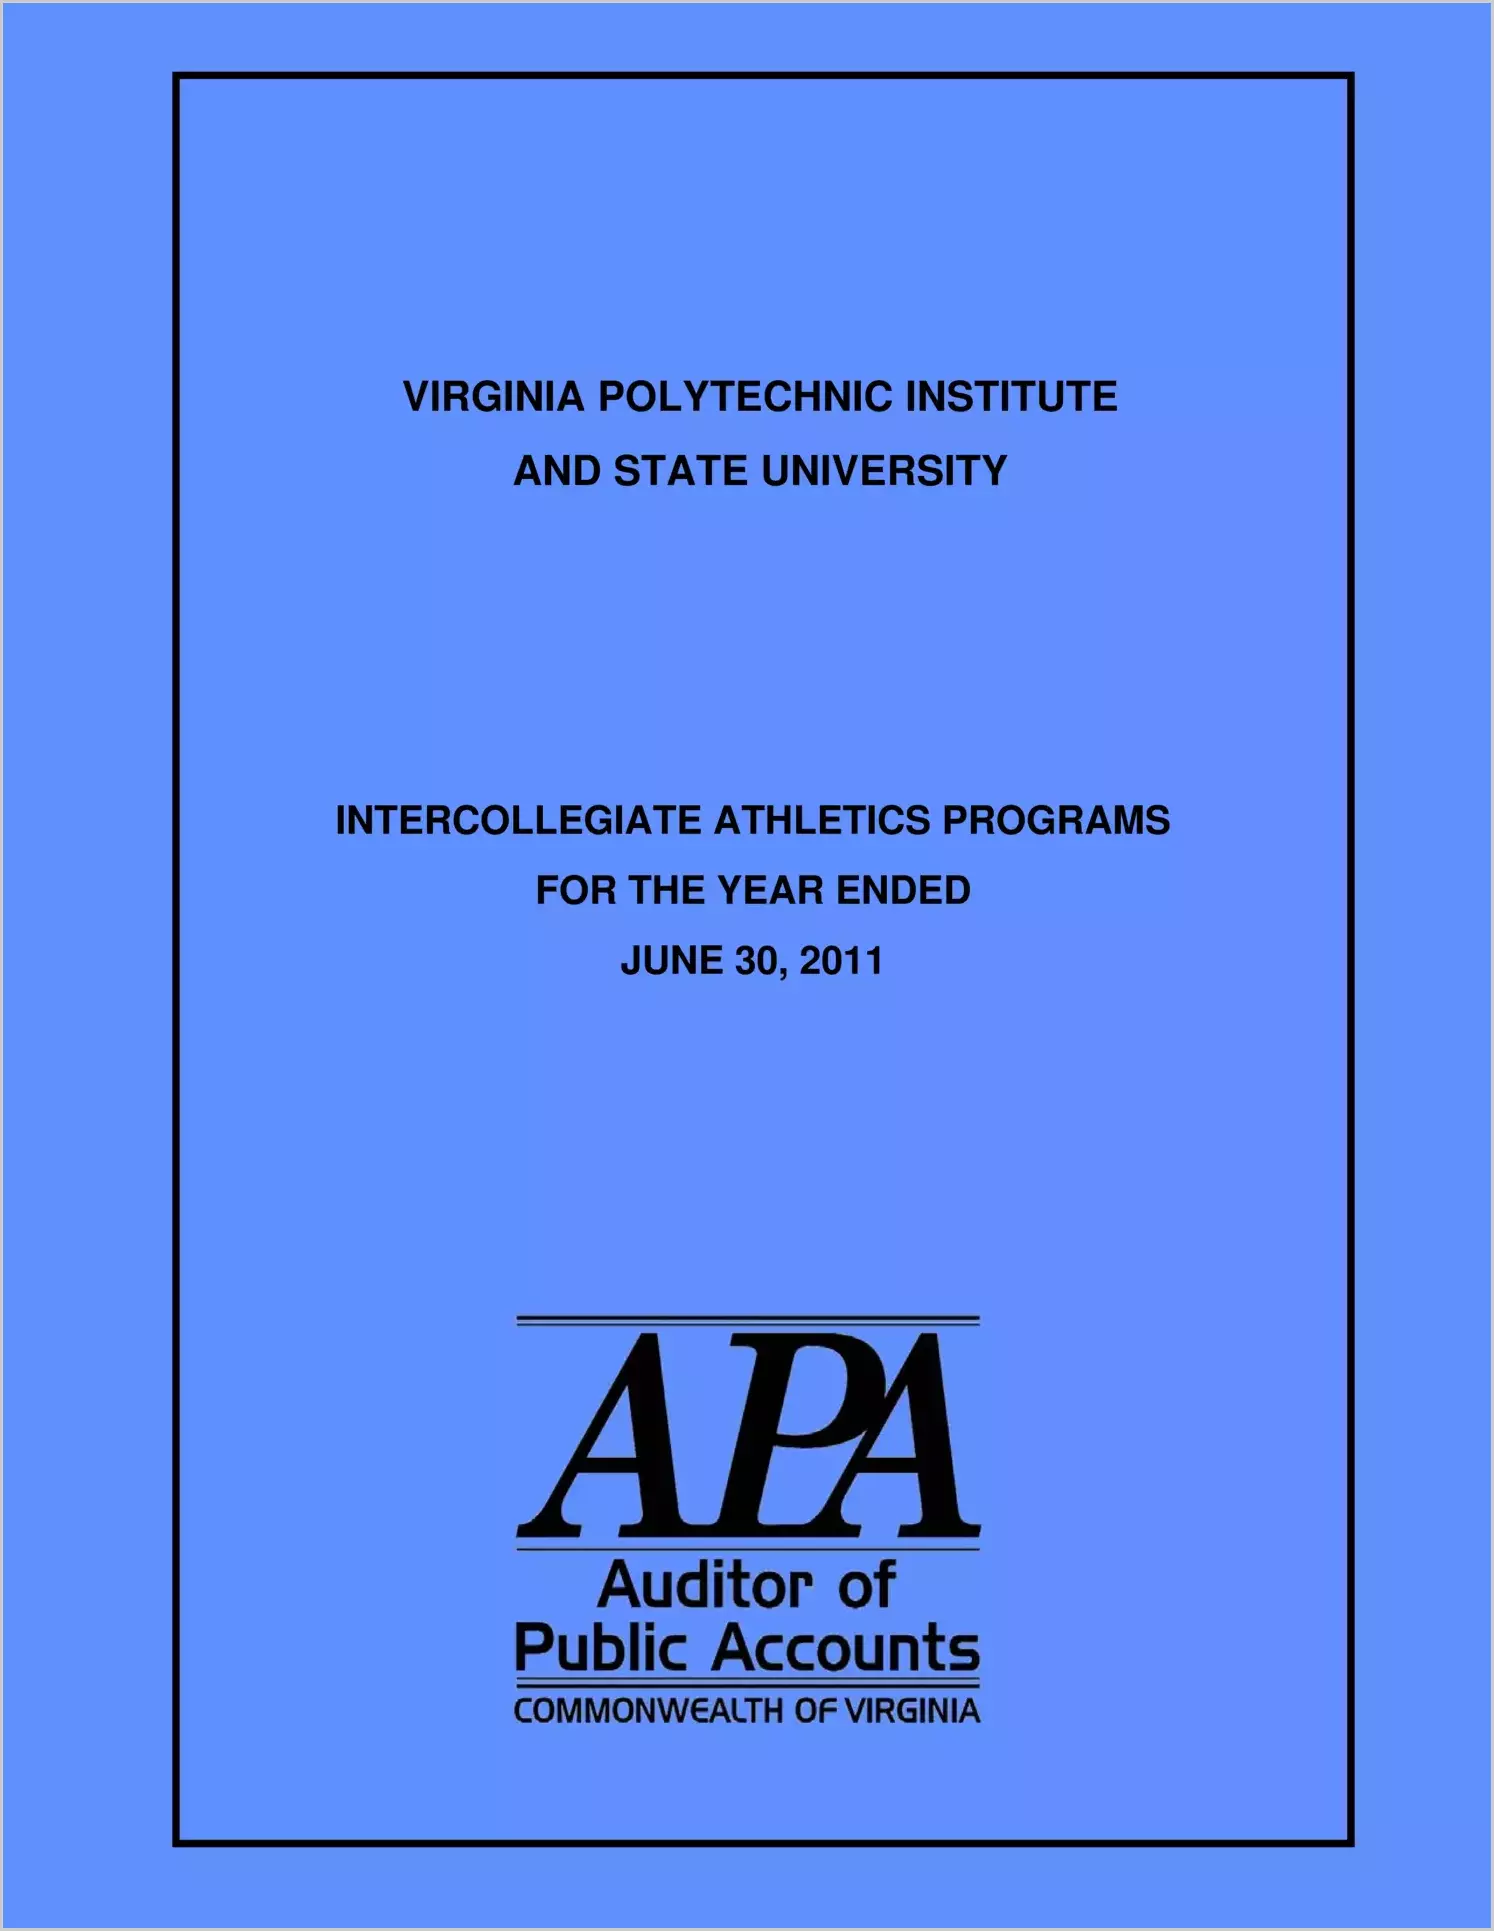 Virginia Polytechnic Institute and State University Intercollegiate Athletic Programs for the year ended June 30, 2011